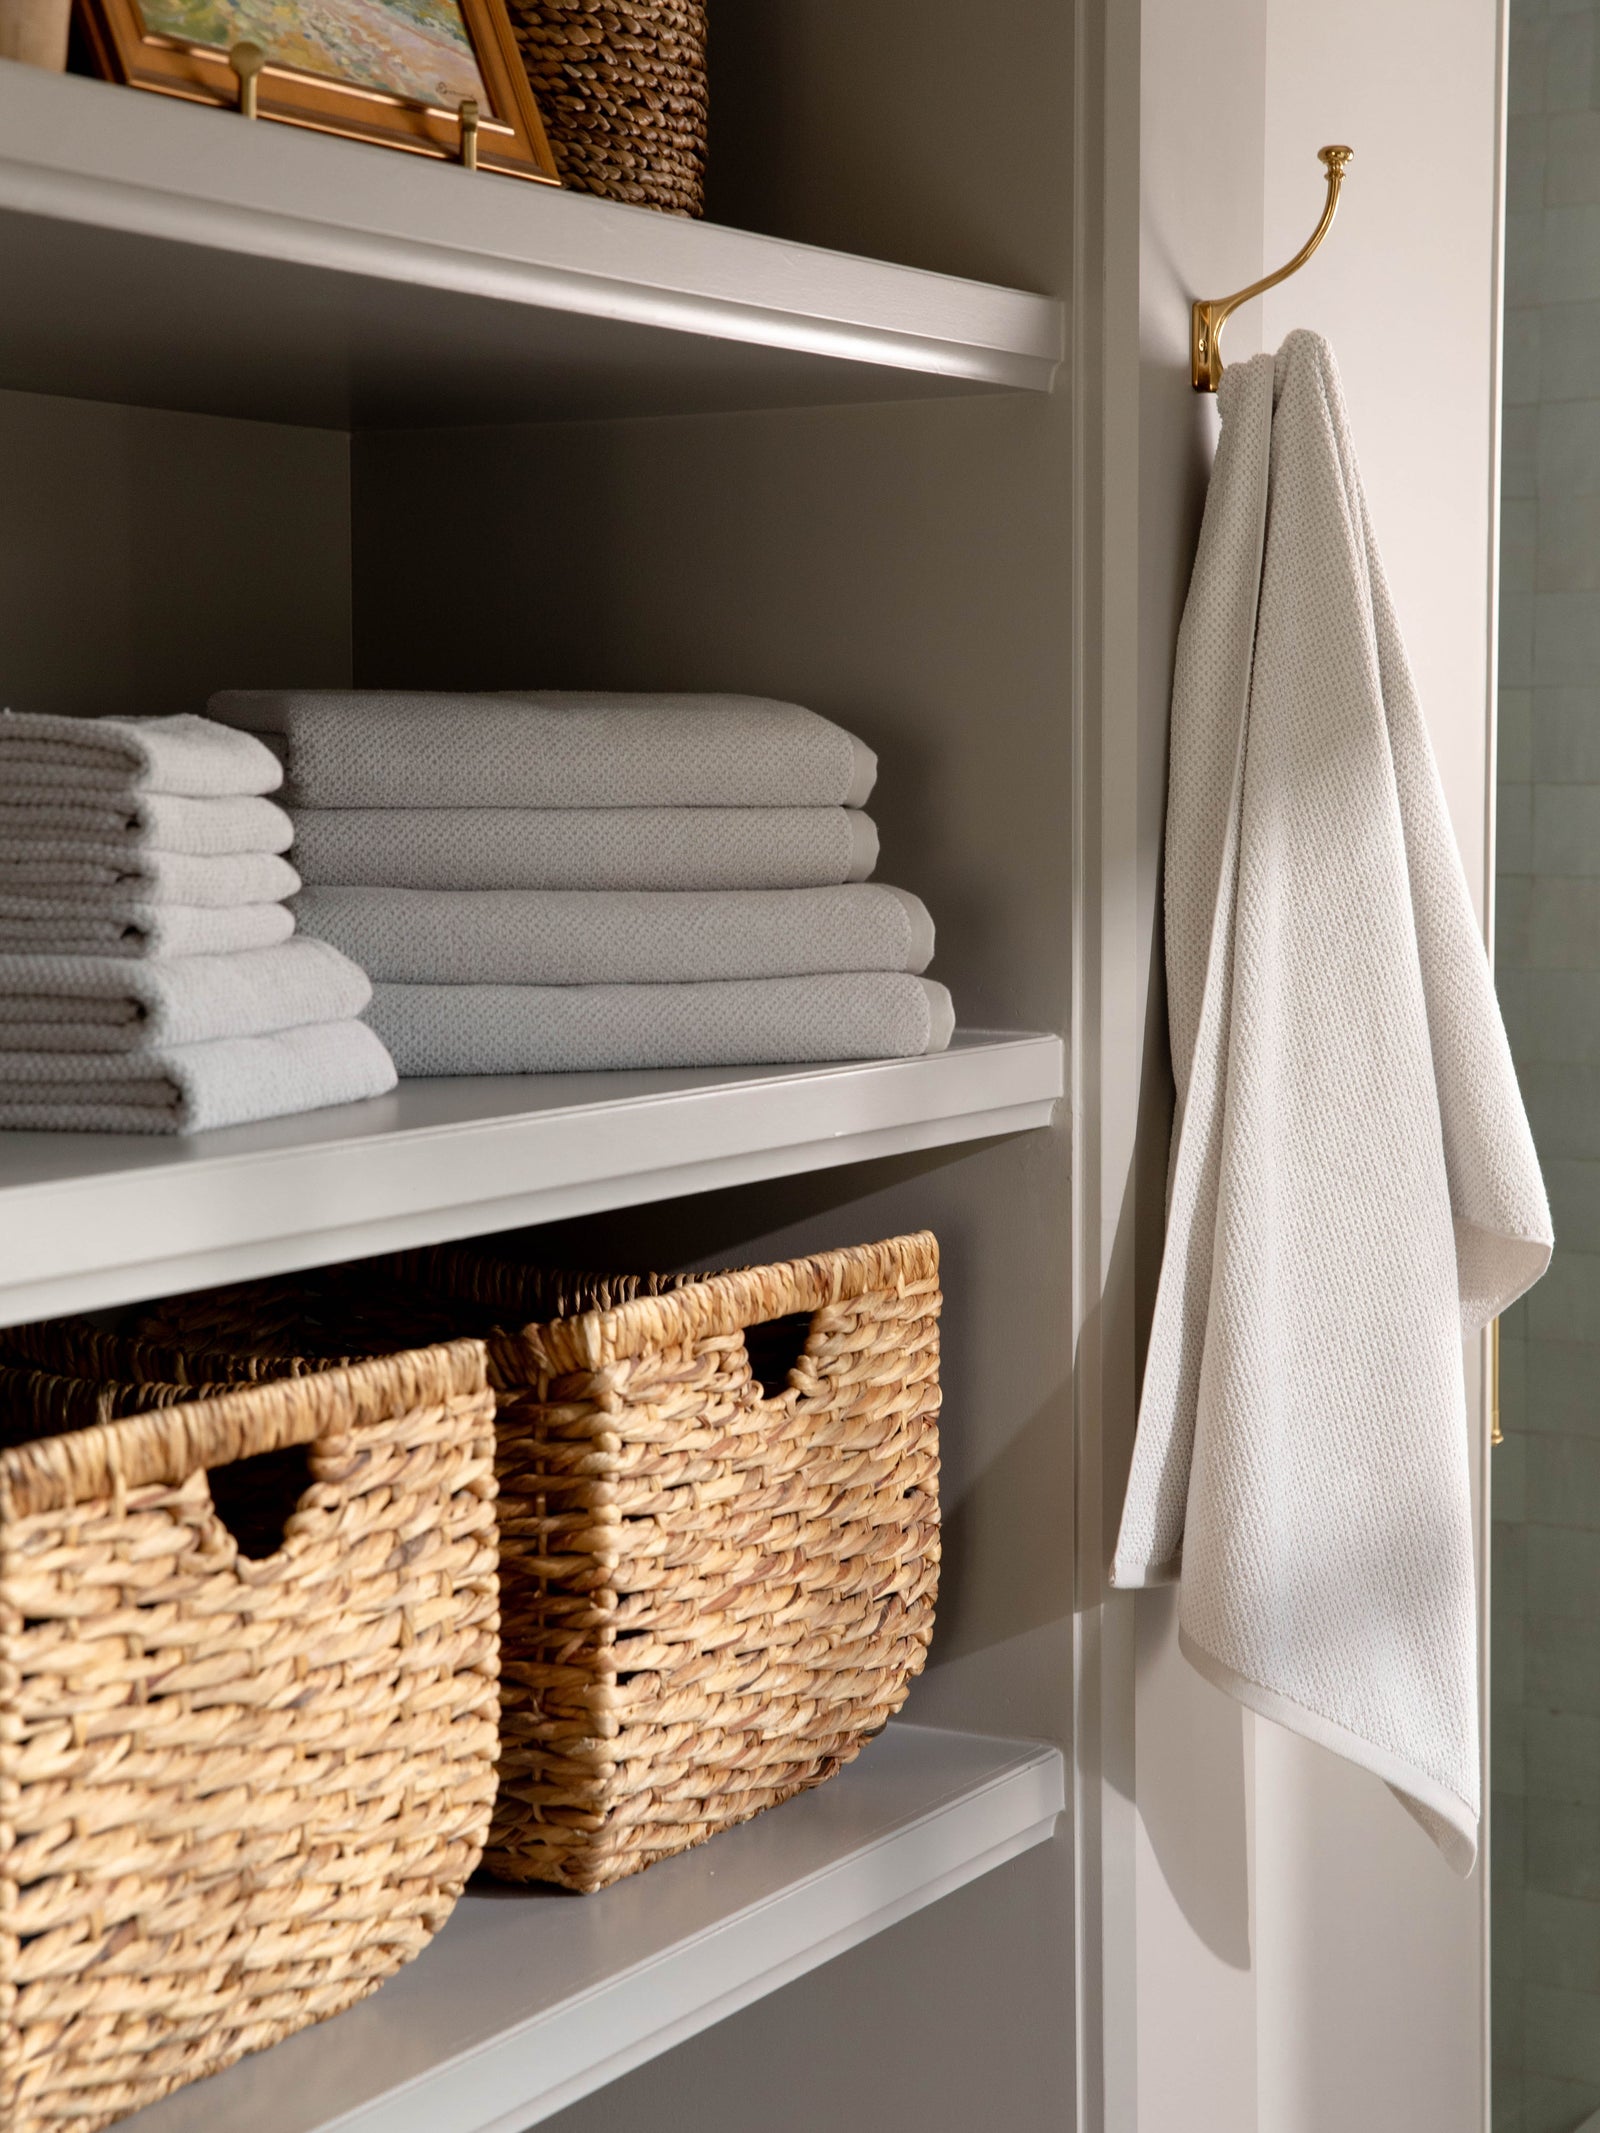 Complete Nantucket Bath Bundle in the color Heathered Light Grey. Photo of Complete Nantucket Bath Bundle taken as the towels rest on a shelf in a bathroom. 